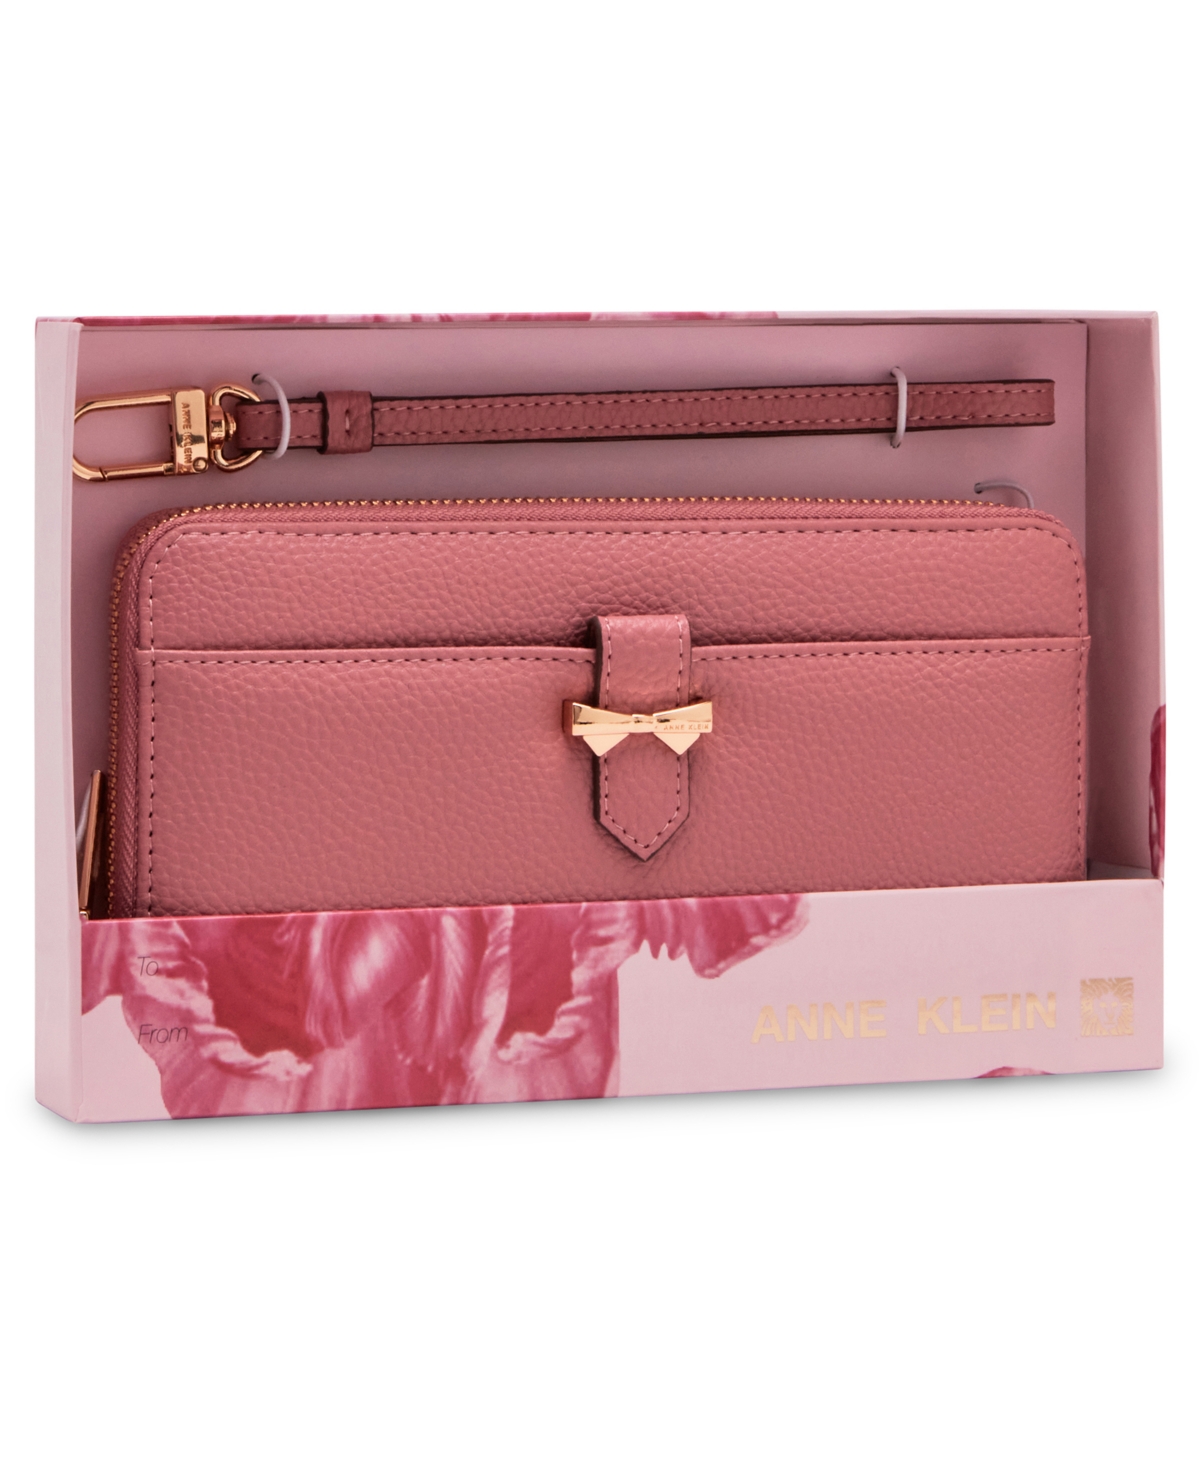 Ak Boxed Slim Zip Wallet with Bow Detail and Wristlet Strap - Stone